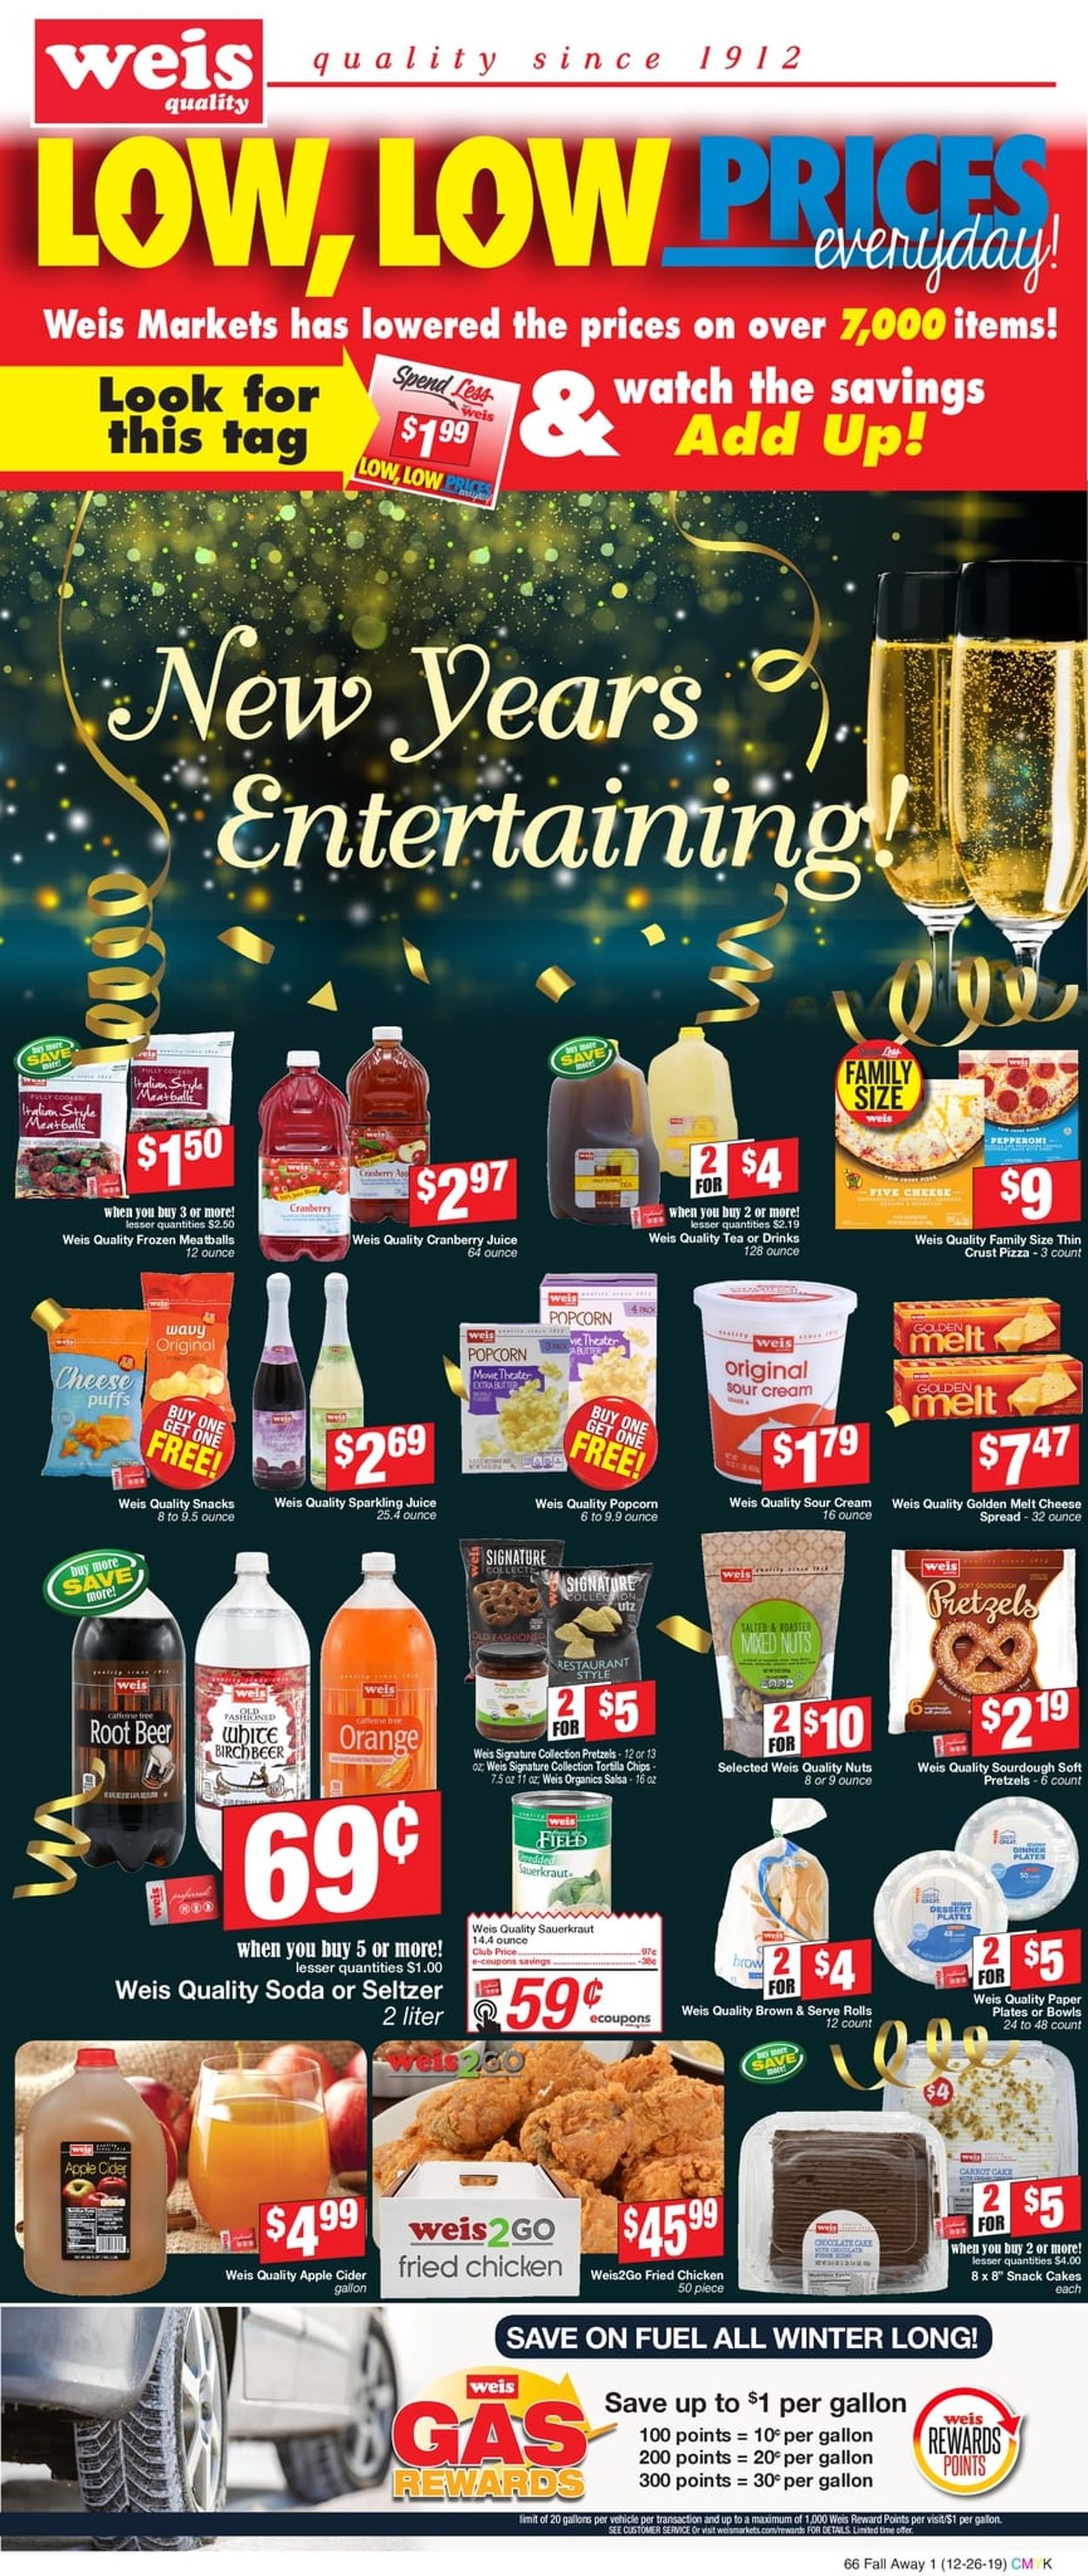 Weis - New Year's Ad 2019/2020 Weekly Ad Circular - valid 12/26-01/02/2020 (Page 5)